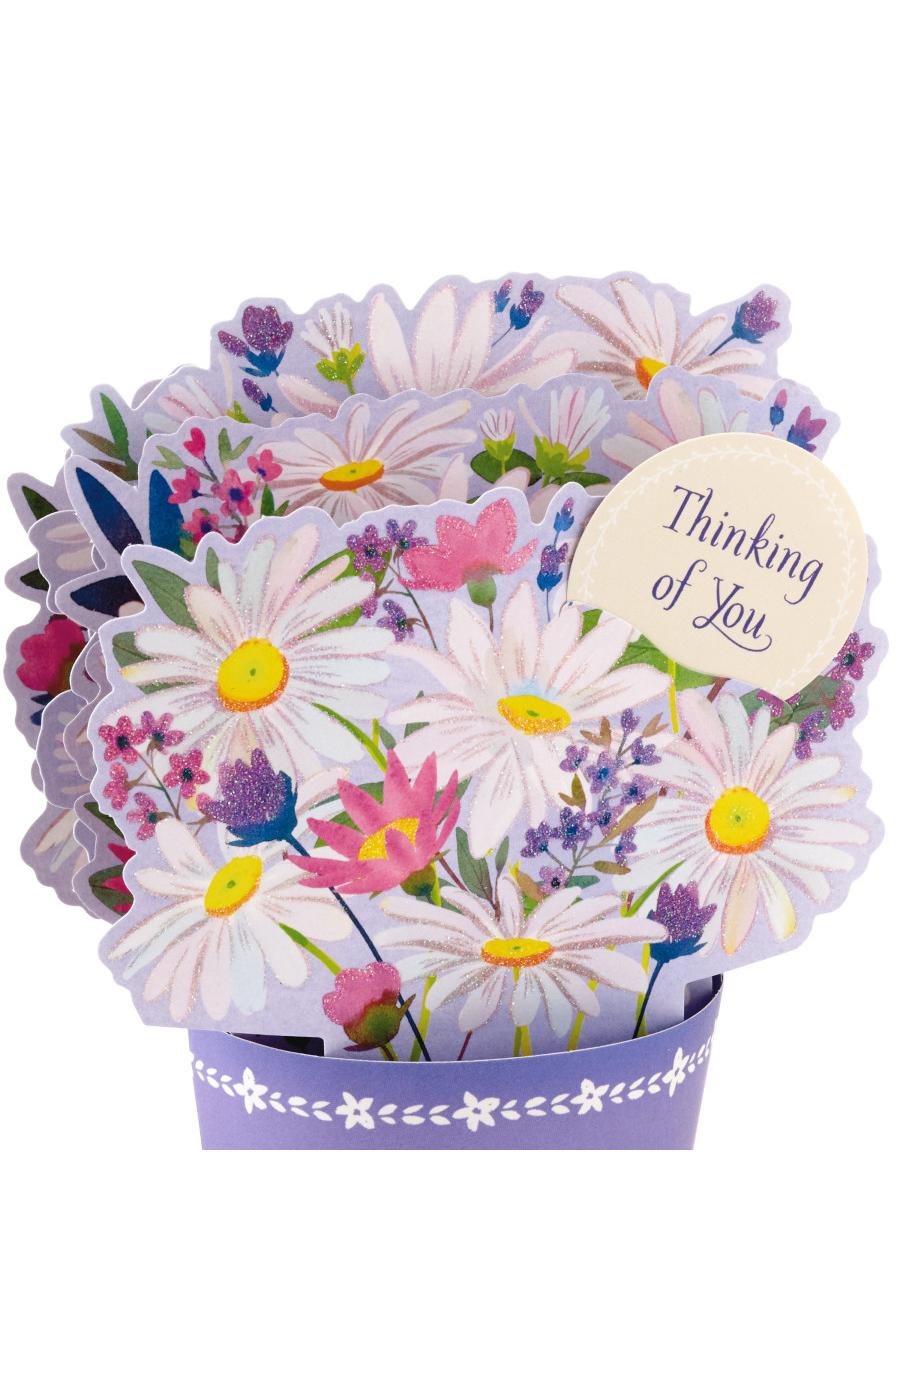 Hallmark Paper Wonder Thinking of You Card Pop-Up Displayable 3D - E72; image 4 of 7